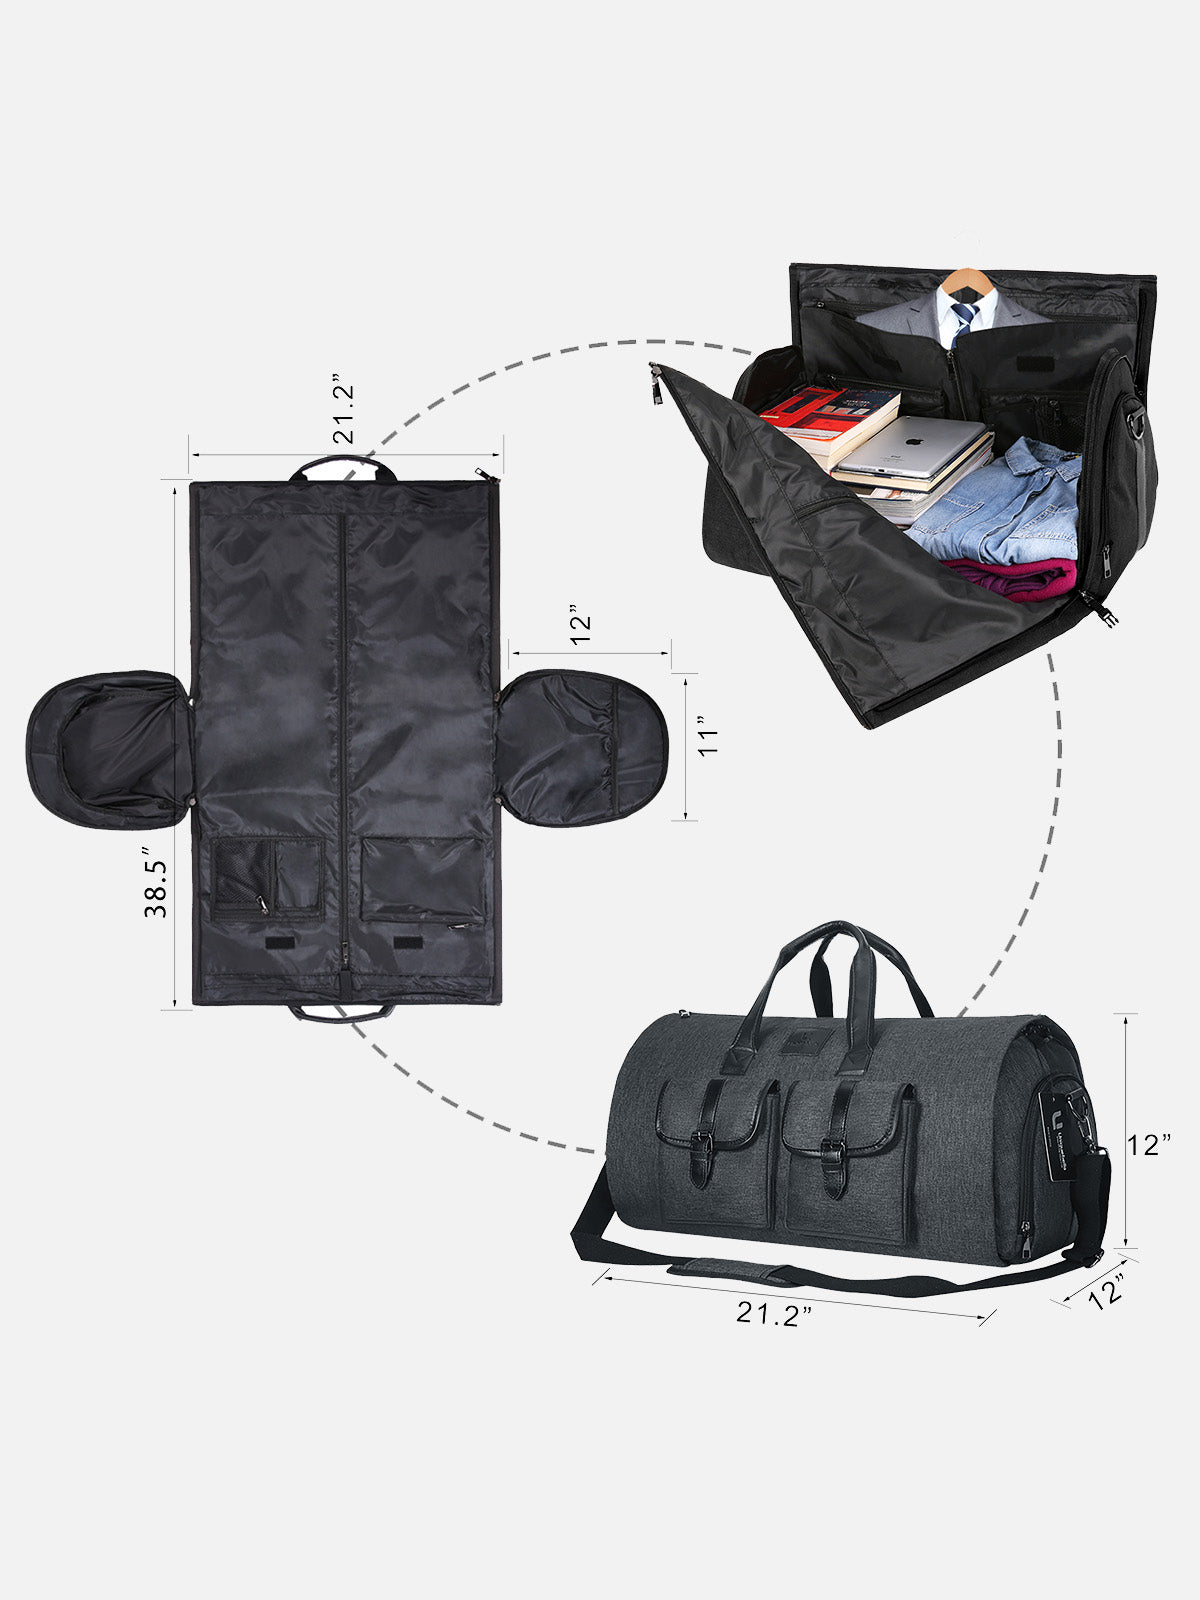 Carry-on Duffel Bag for Travel with Shoes Pouch